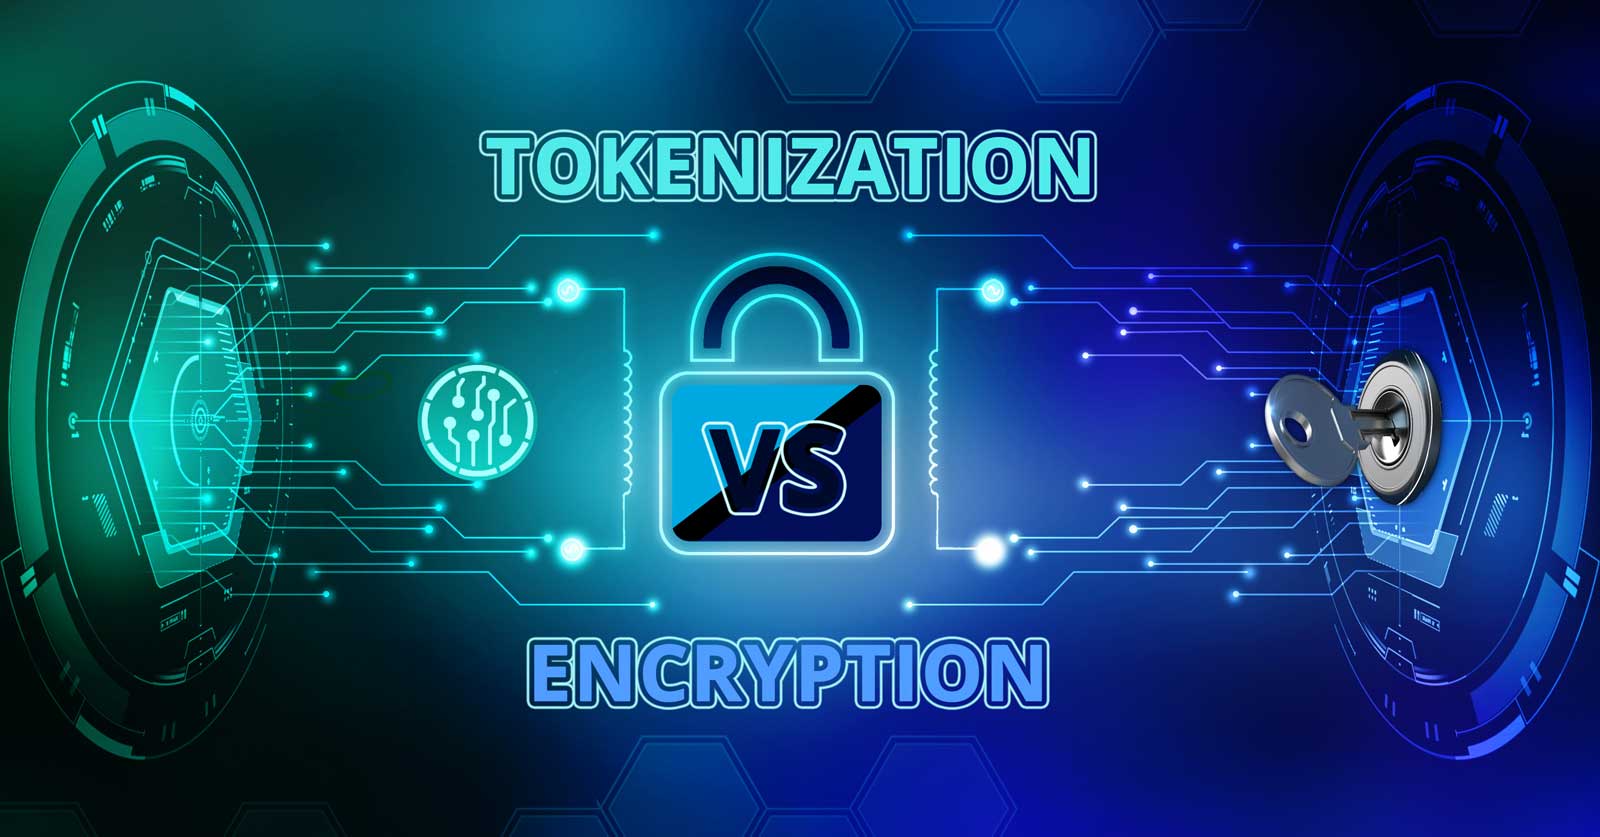 What Is The Difference Between Tokenization Vs. Encryption